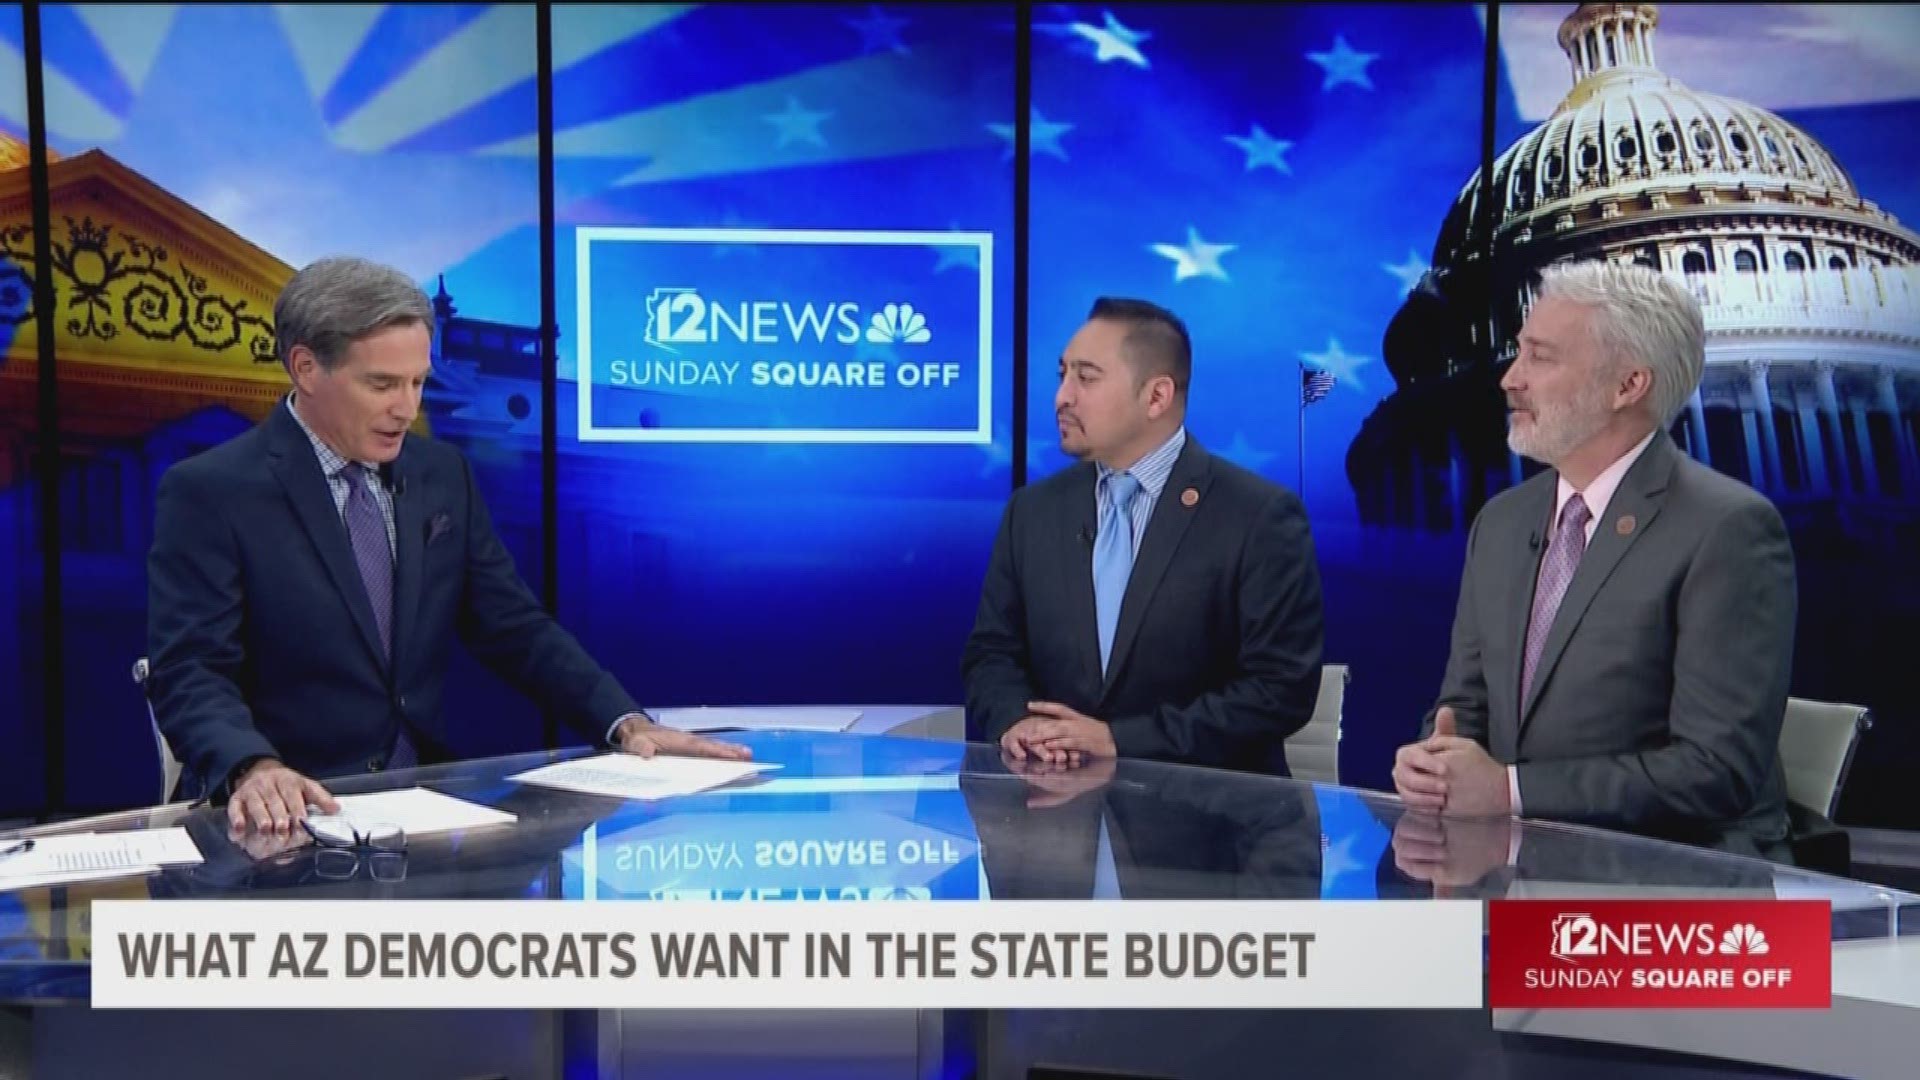 With Republicans holding slim majorities in both chambers of the Legislature, Democrats could cast decisive votes to pass next year's state budget. Two leading Democrats tell us what they'd want to see in the budget.